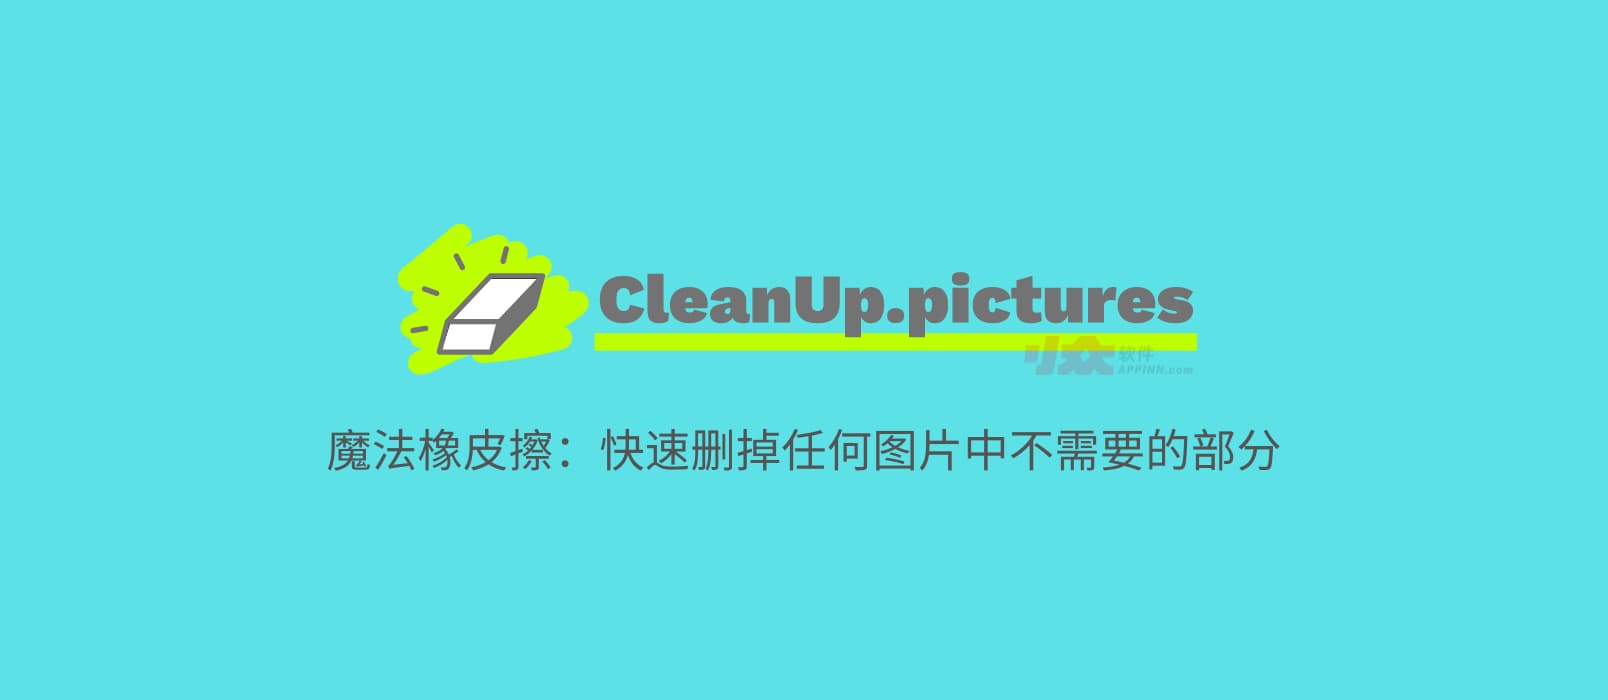 CleanUp.pictures - 魔法橡皮擦：快速删掉任何图片中不需要的部分